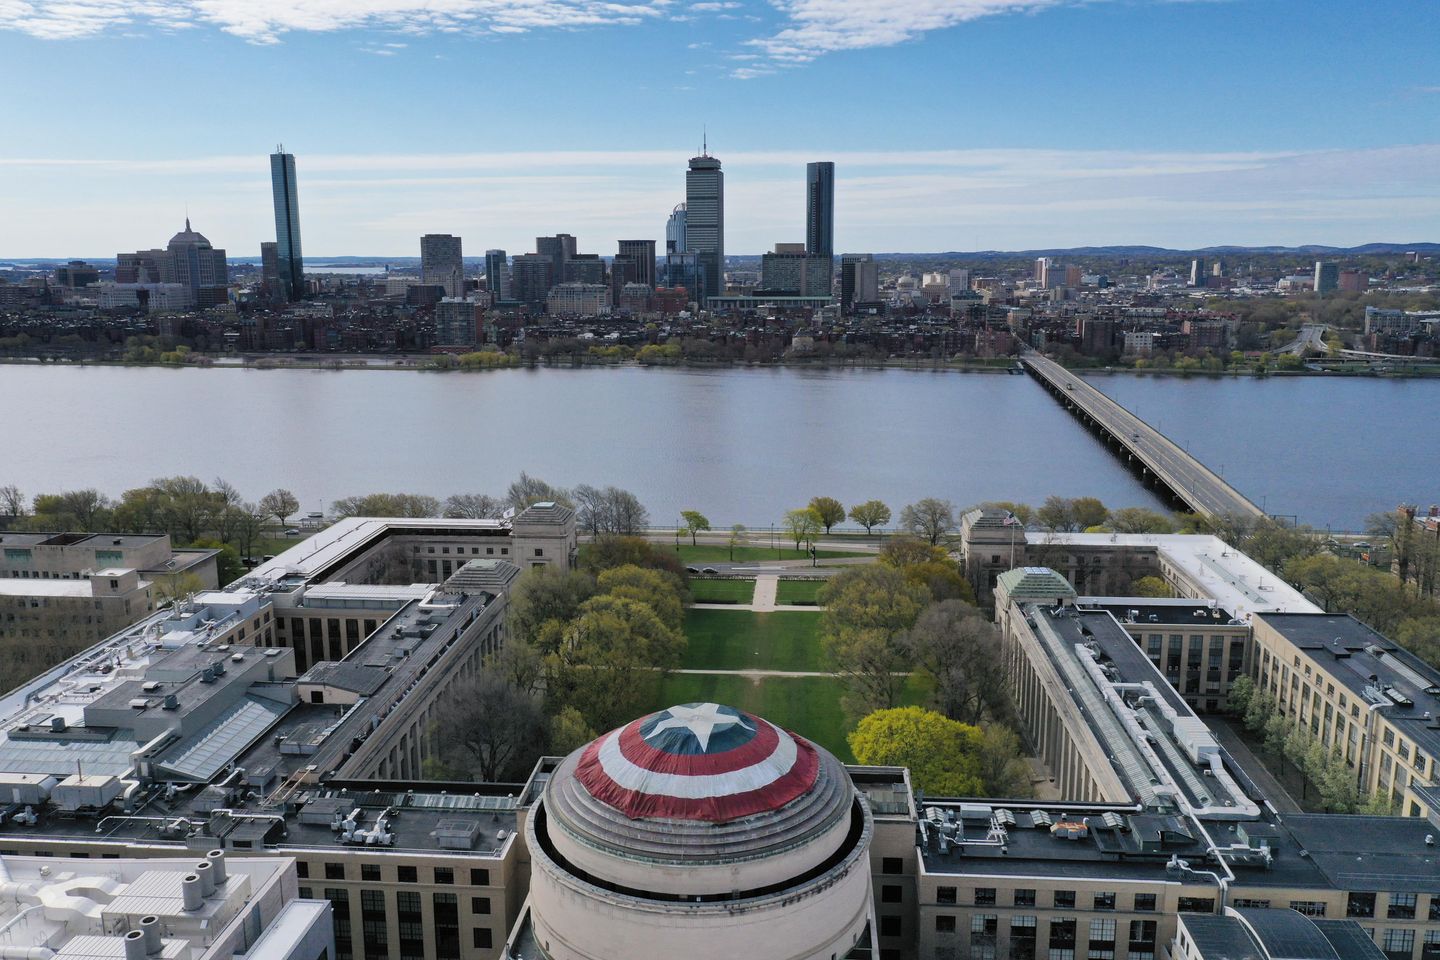 View of the Boston skyline with Captain America's shield on the MIT Great Dome